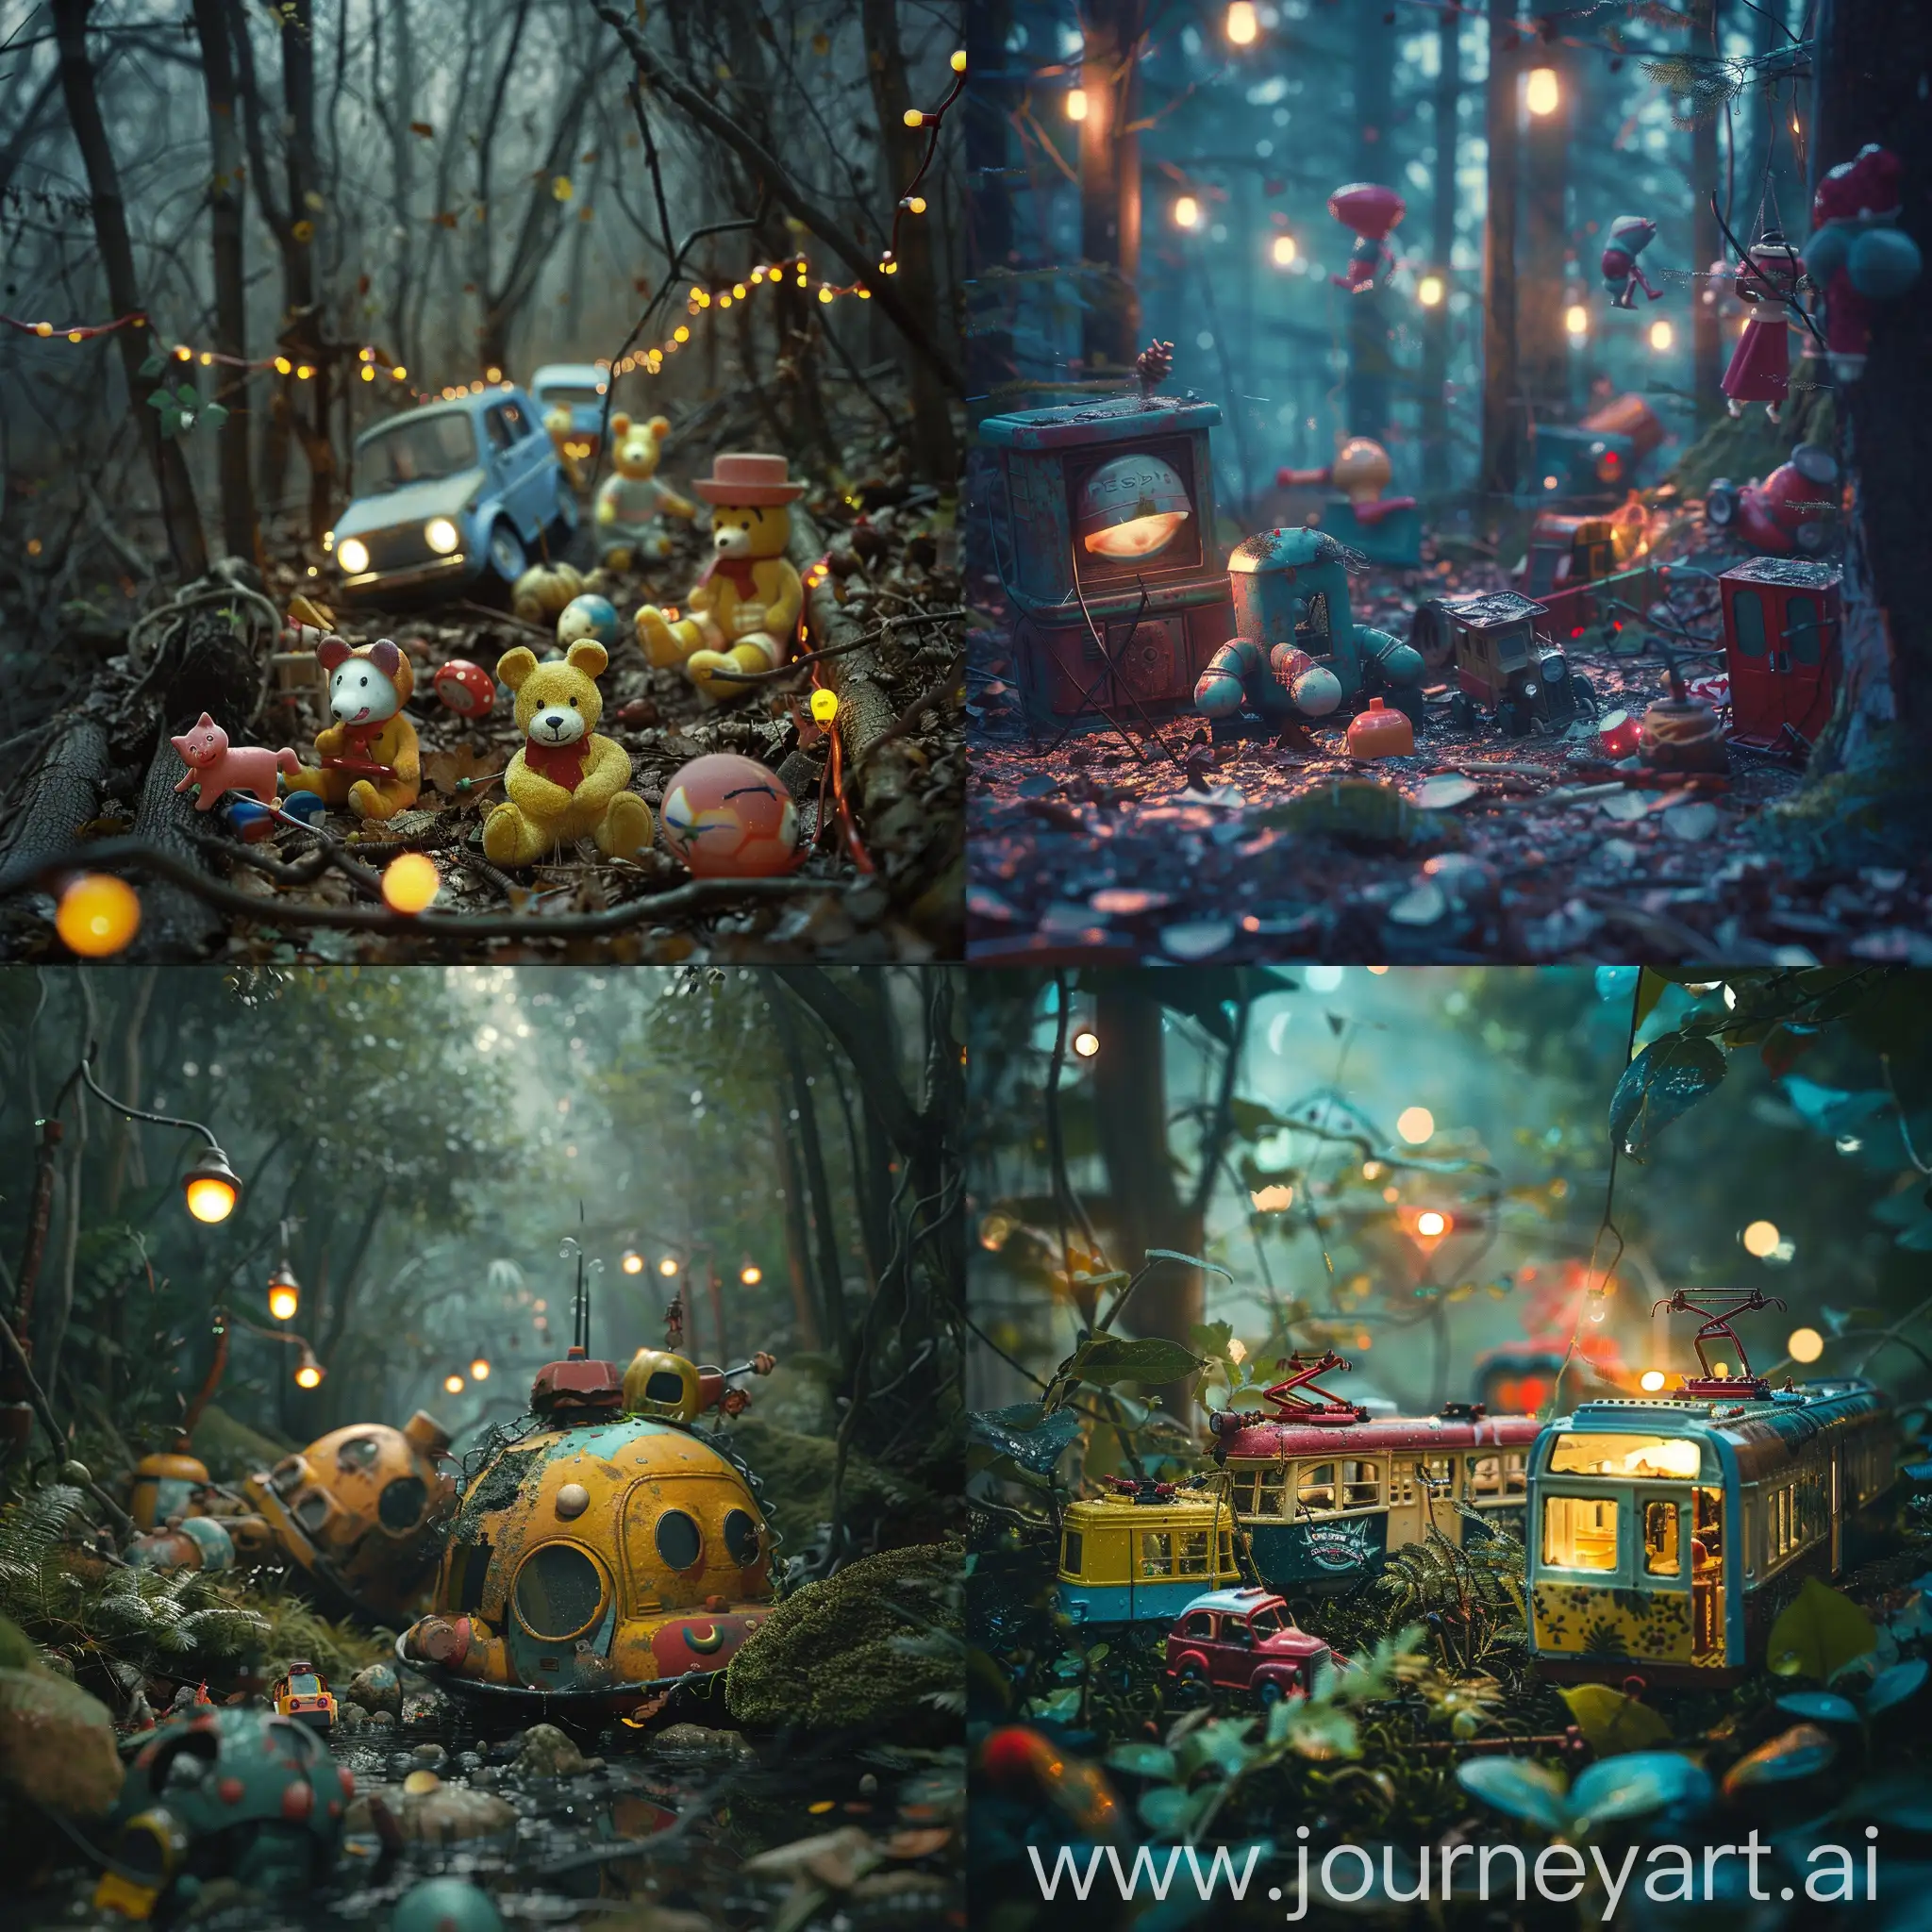 Abandoned-Toys-in-Enchanted-Forest-with-Surreal-Lights